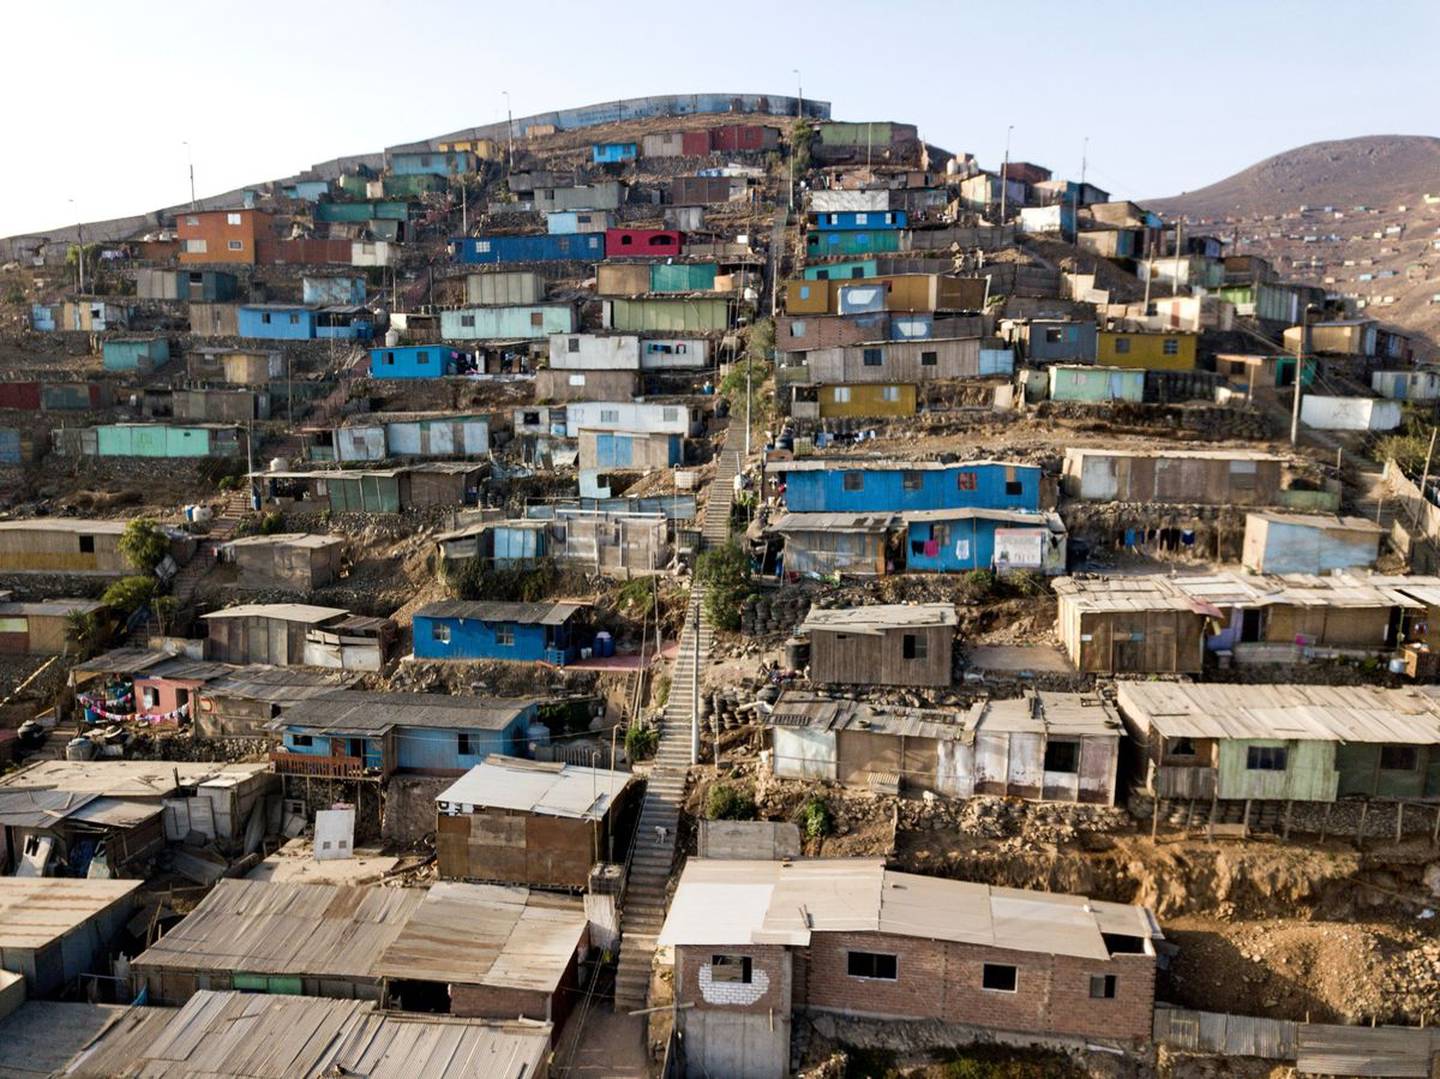 Low-income neighborhoods in Colombia.